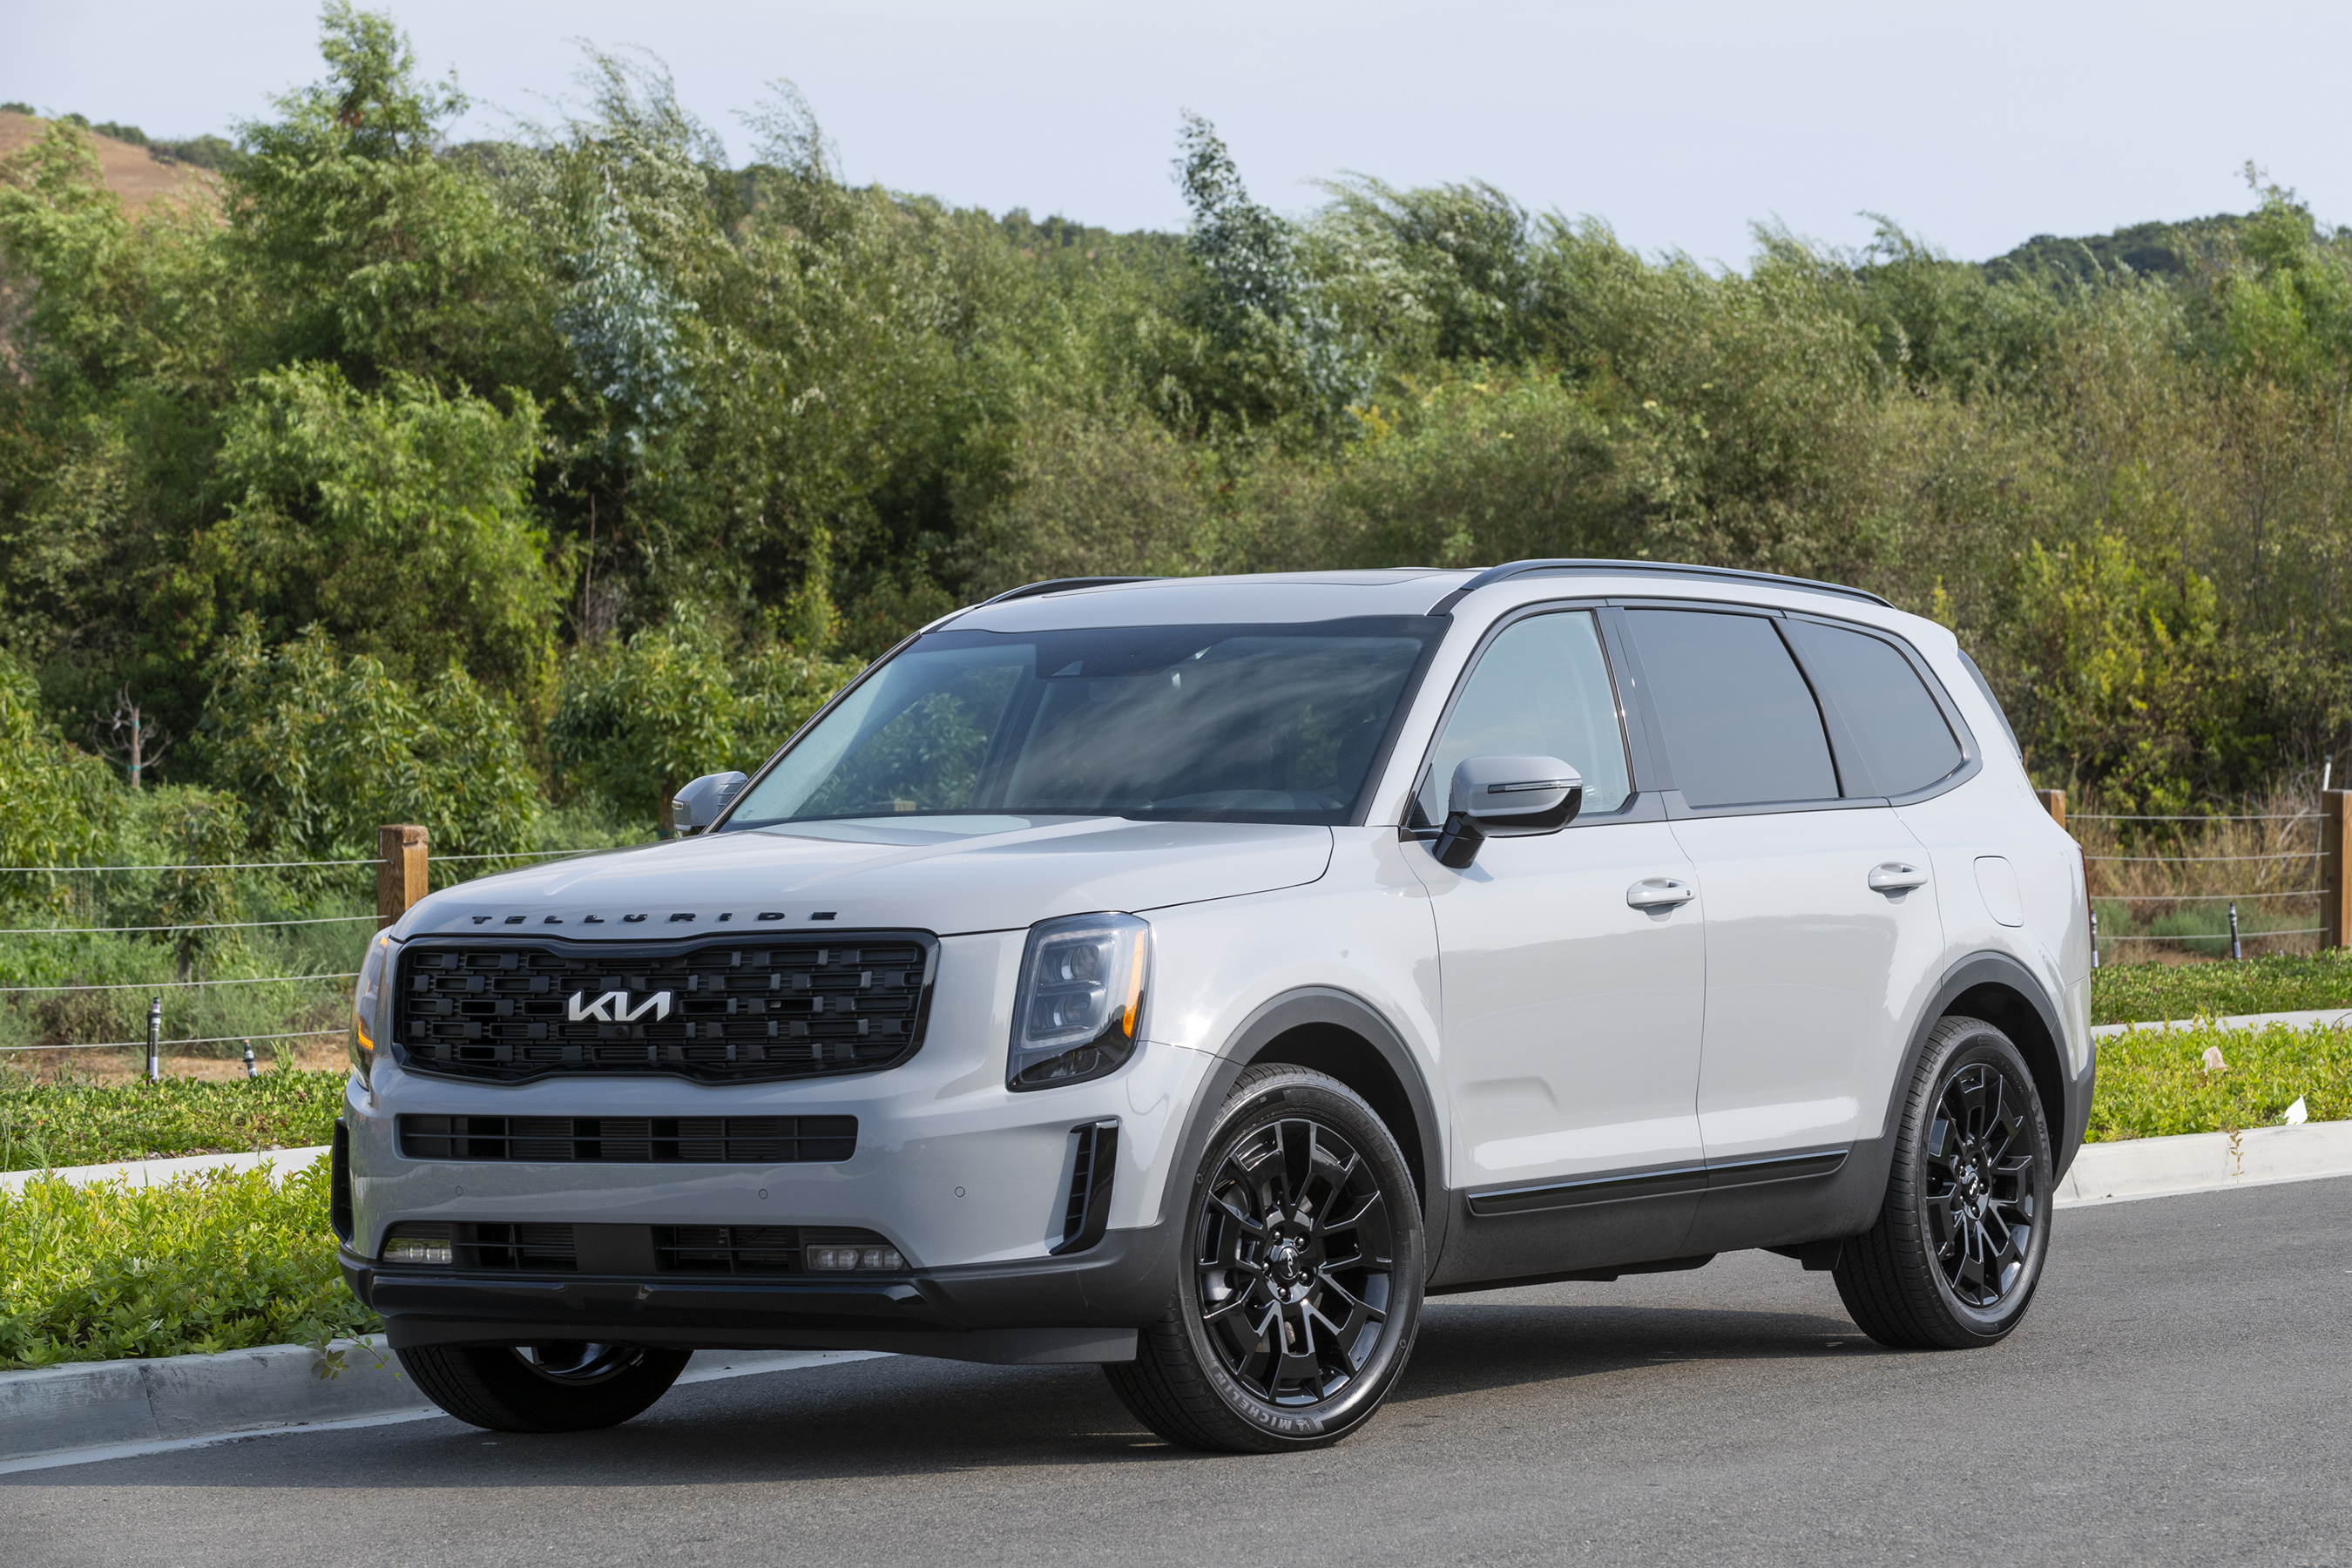 The 2022 Kia Telluride is as good-looking in its sheet metal as it is on paper. Base front-wheel-drive models start under $33,000, and that’s for a family-friendly SUV that looks as at home at an expensive country club as it does in a suburban driveway.